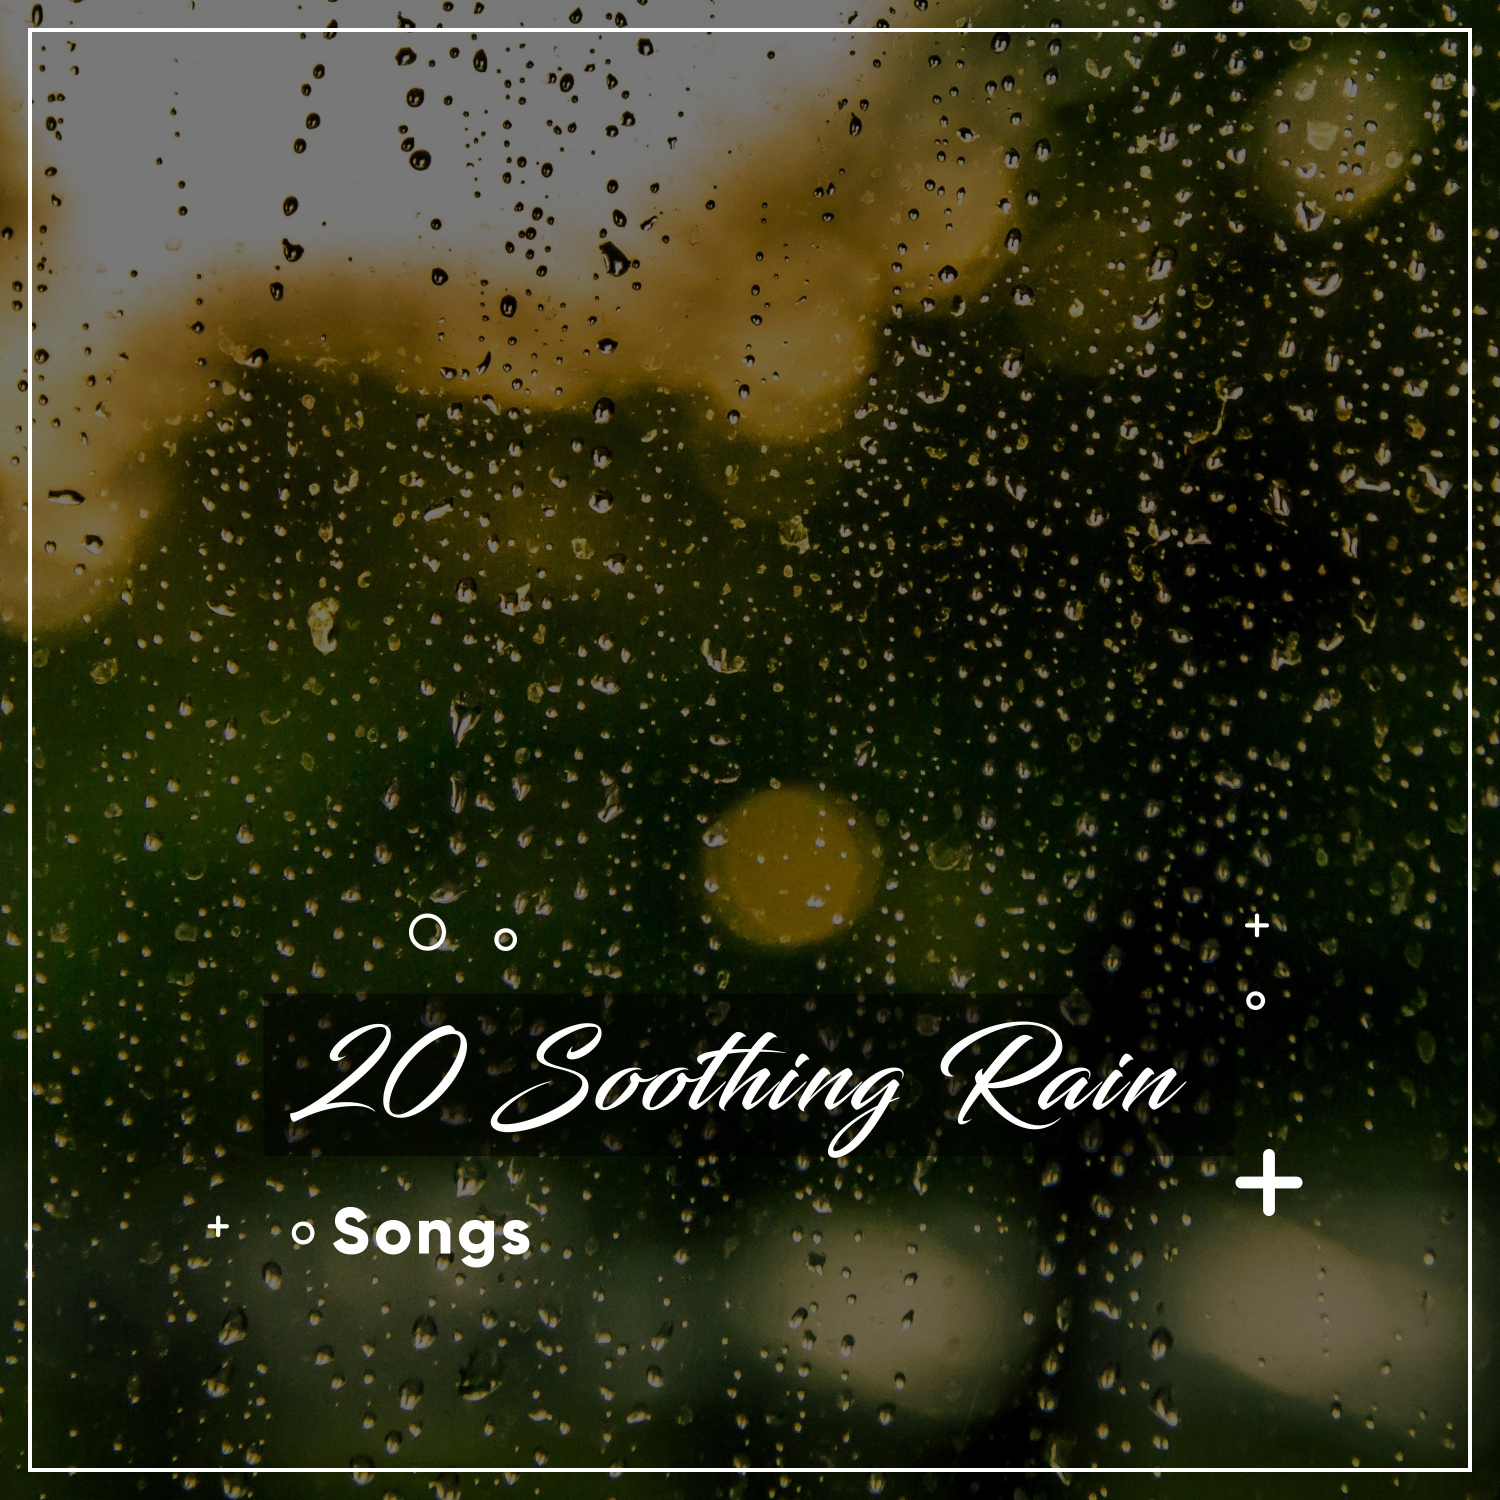 20 Soothing Rain Songs for Study & Reflection